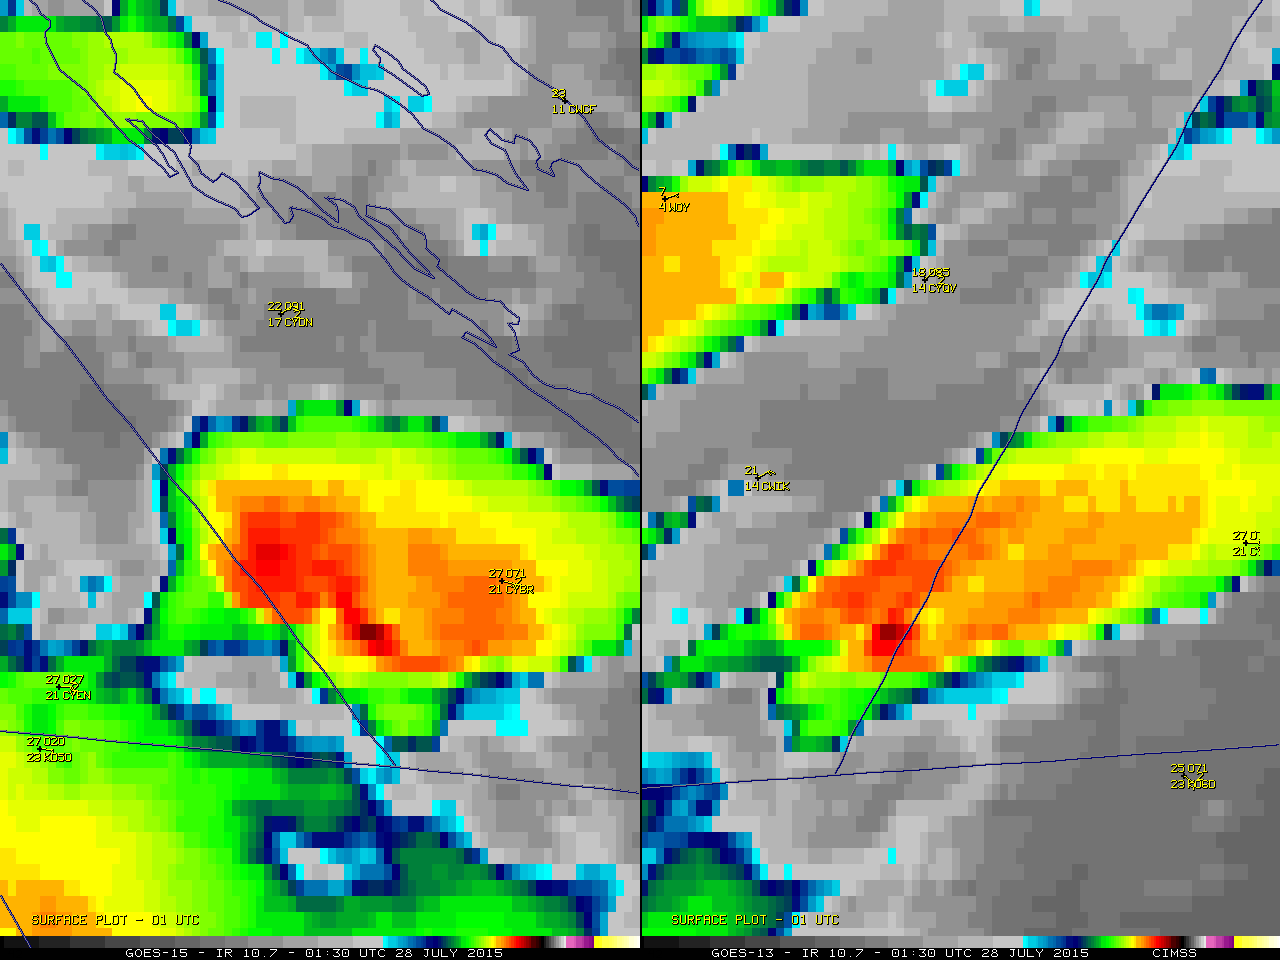 GOES-15 (left) and GOES-13 (right) 10.7 µm Infrared images, with surface reports [click to play animation]